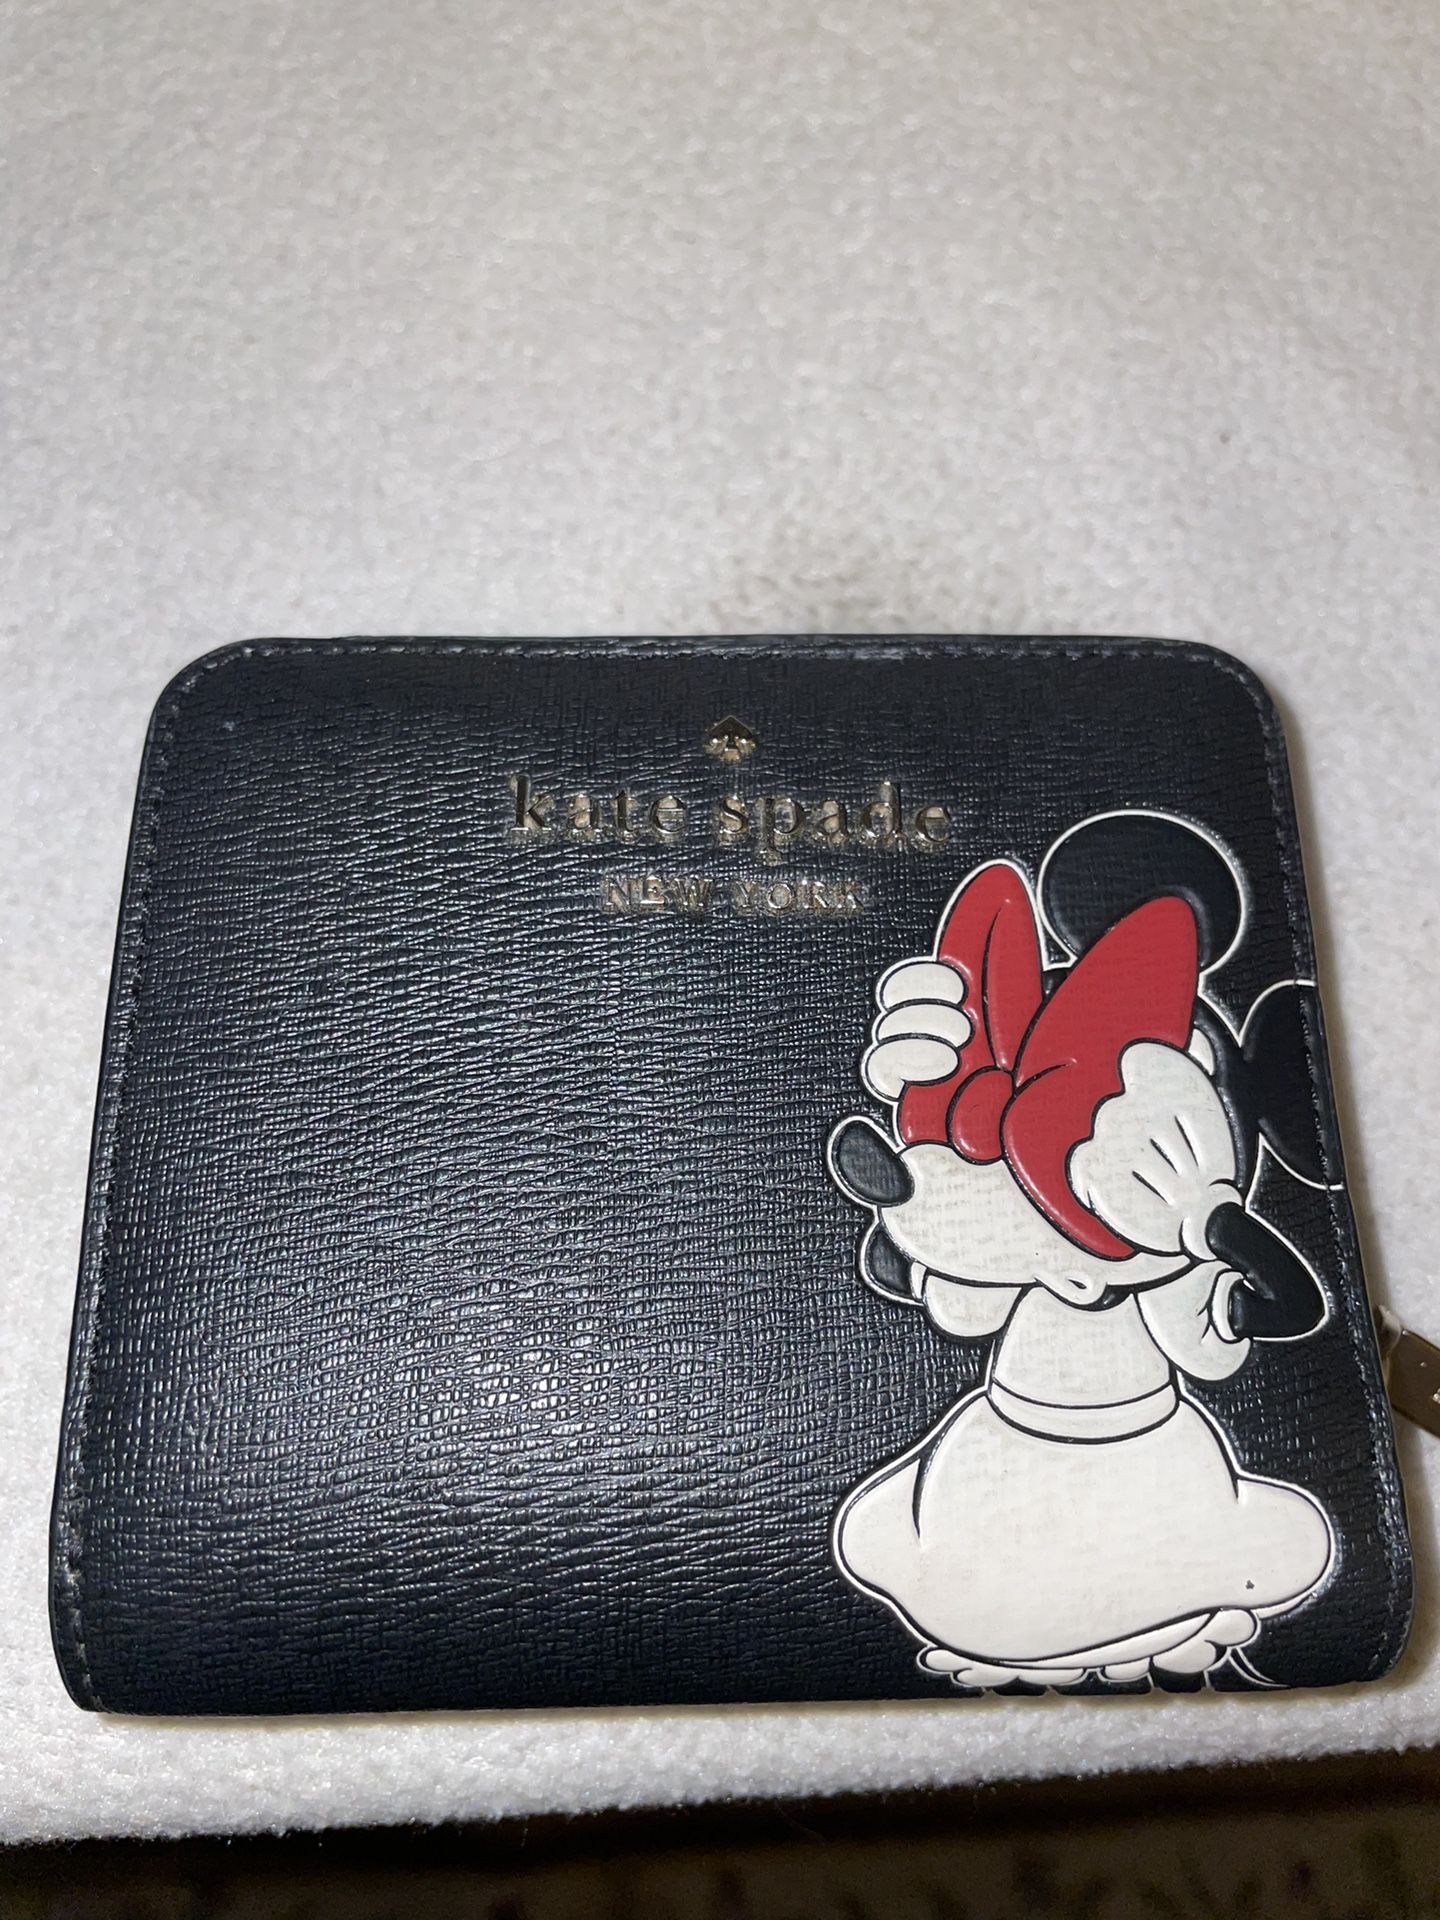 Kate Spade & Disney Special Edition Black Leather Wallet